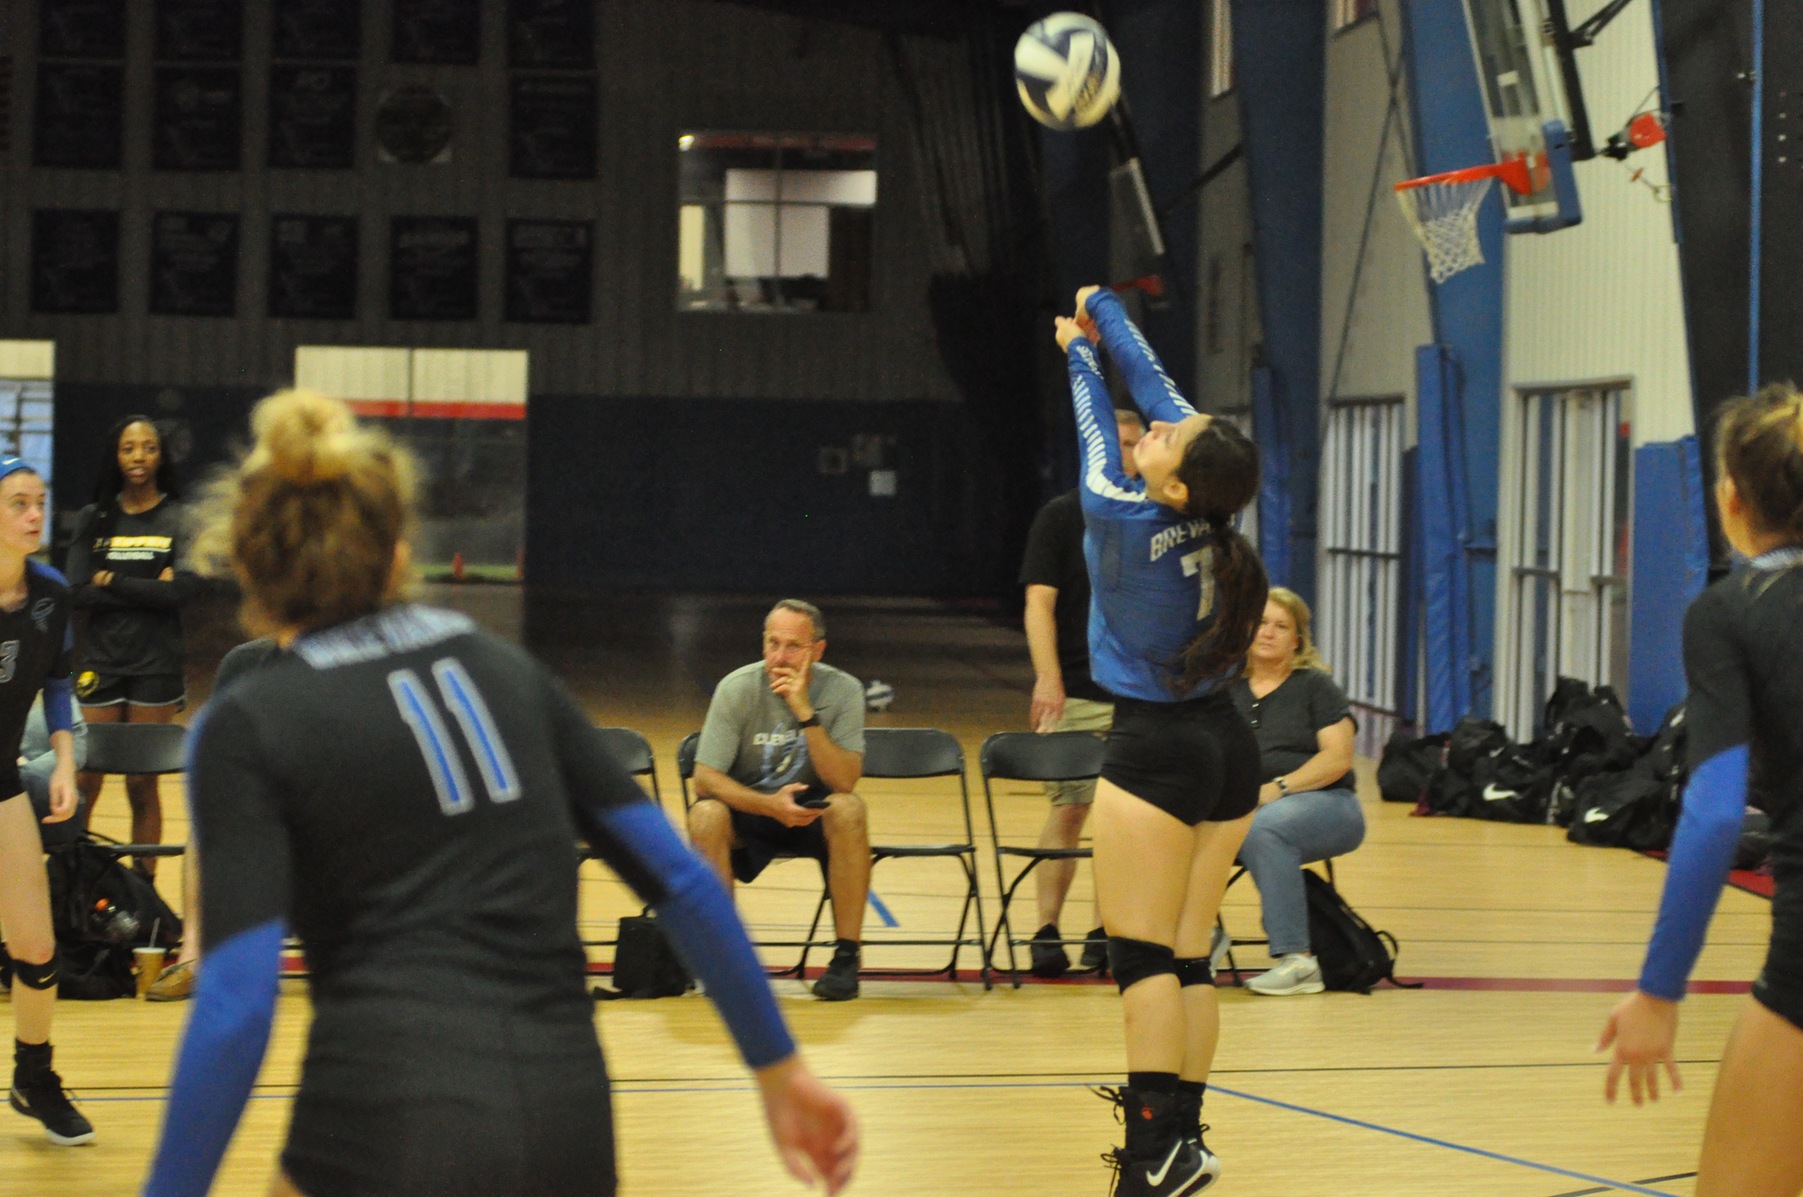 Women’s Volleyball hosts the first day of the Tornado Challenge